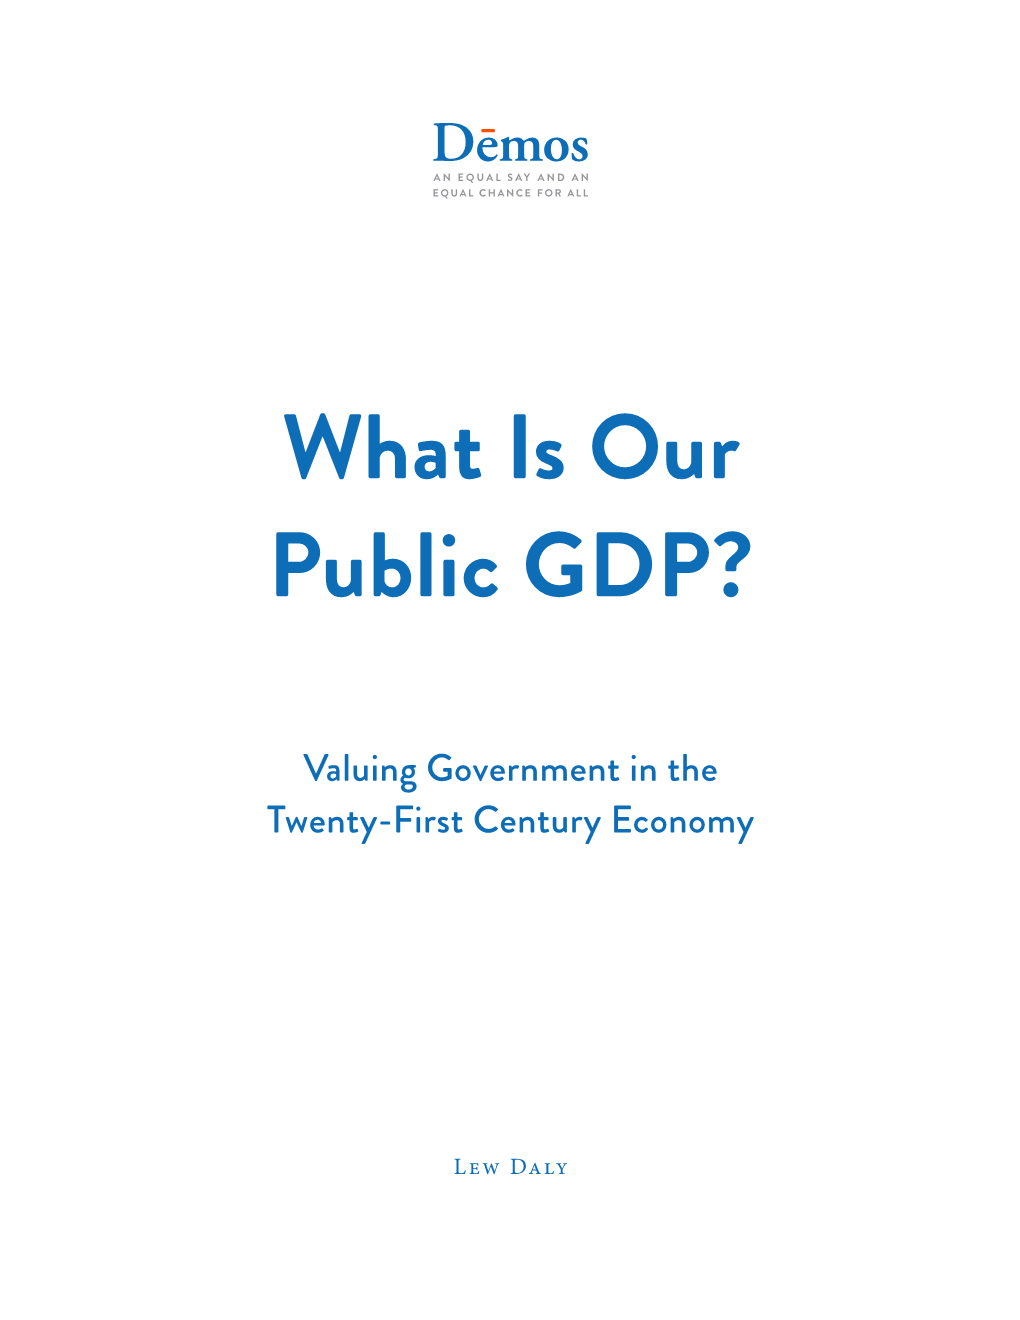 What Is Our Public GDP?